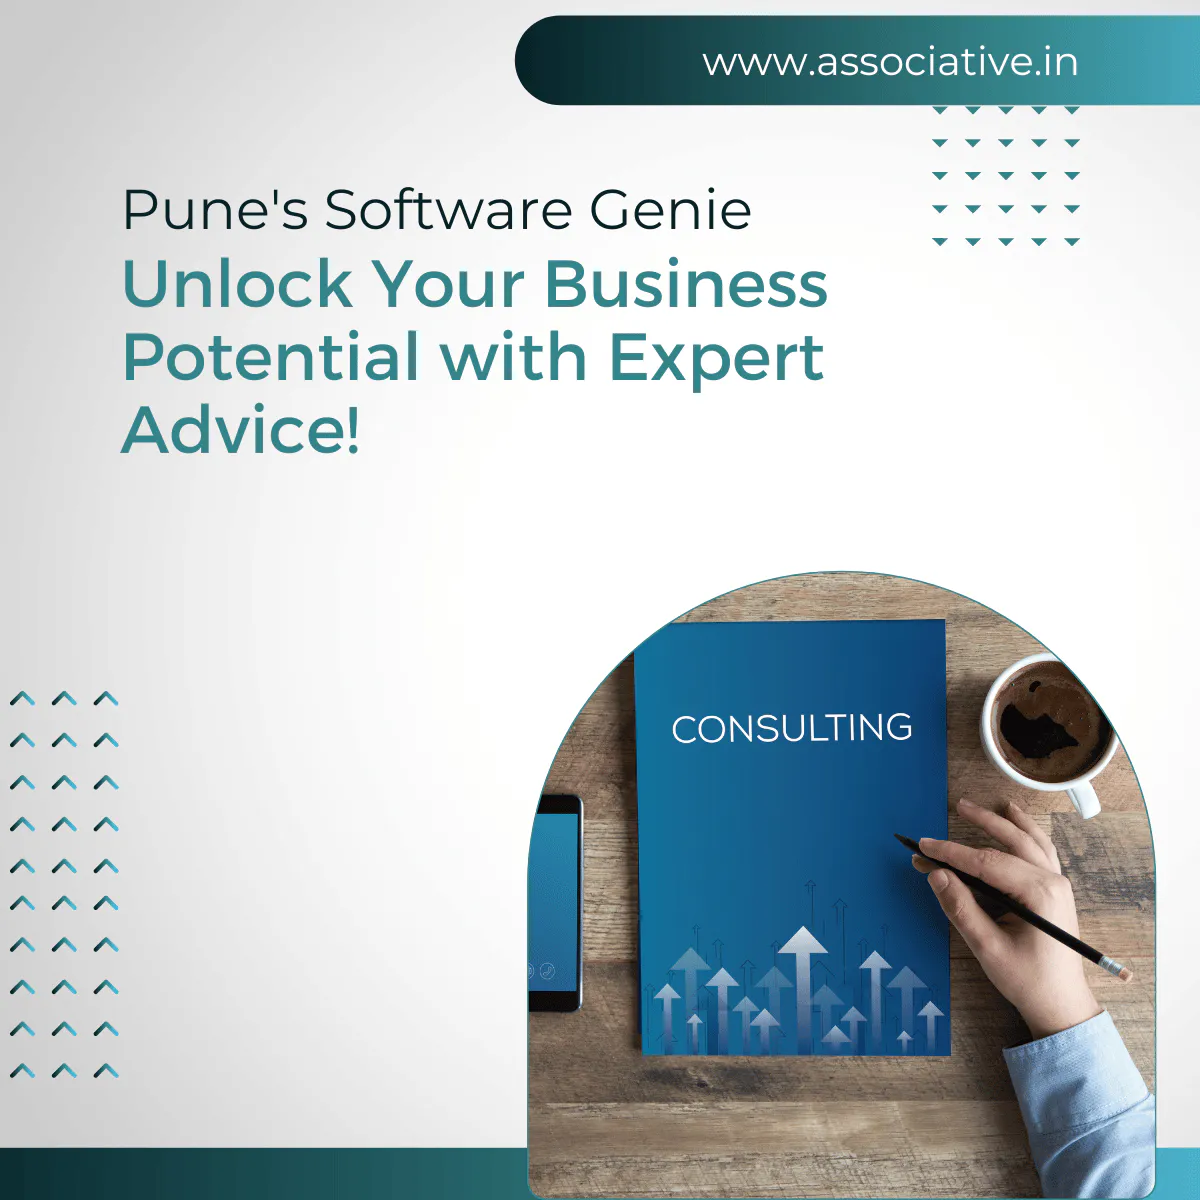 Local IT Services Provider in Pune